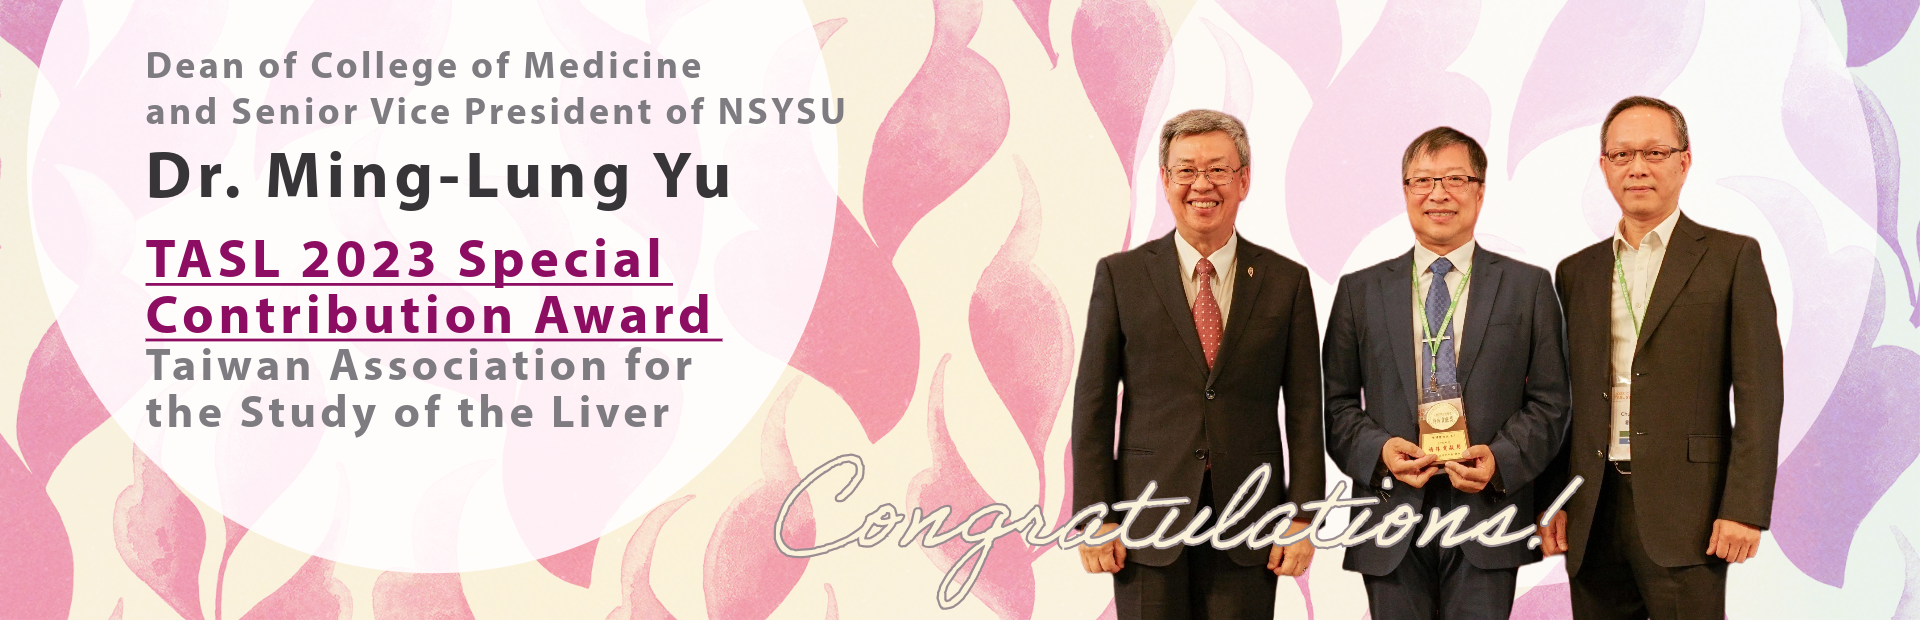 Dr. Ming-Lung Yu, Dean of the College of Medicine and Senior Vice President at NSYSU received the 2023 TASL Special Contribution Award